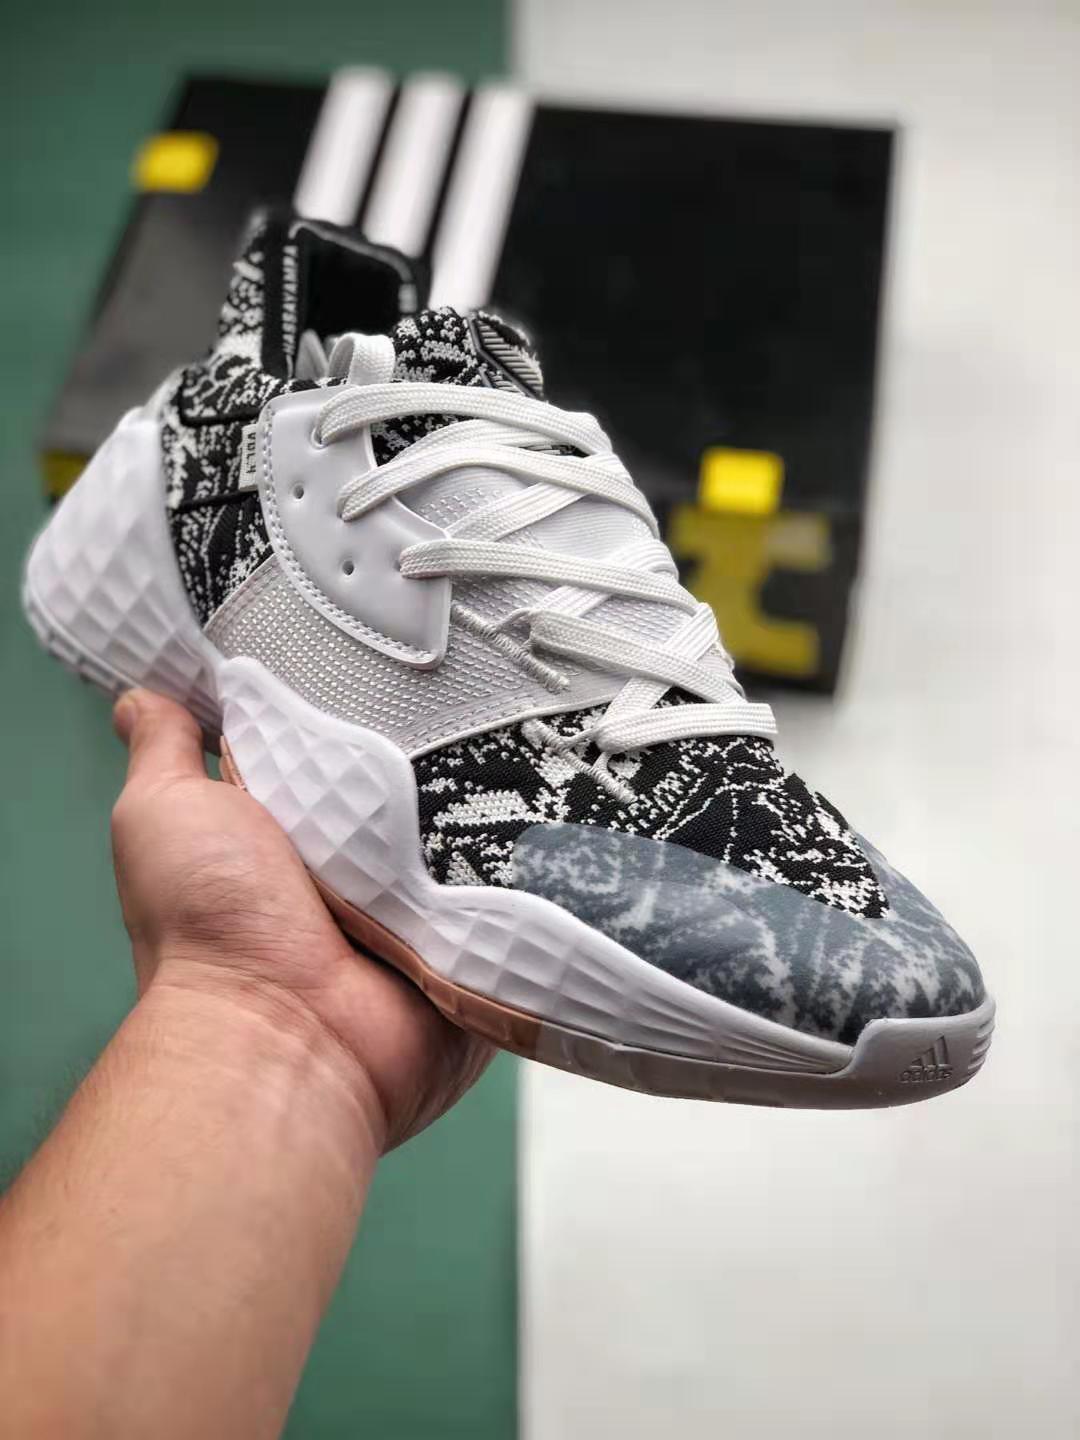 Adidas Harden Vol. 4 Cookies & Cream EF1260 - Latest Release from Adidas